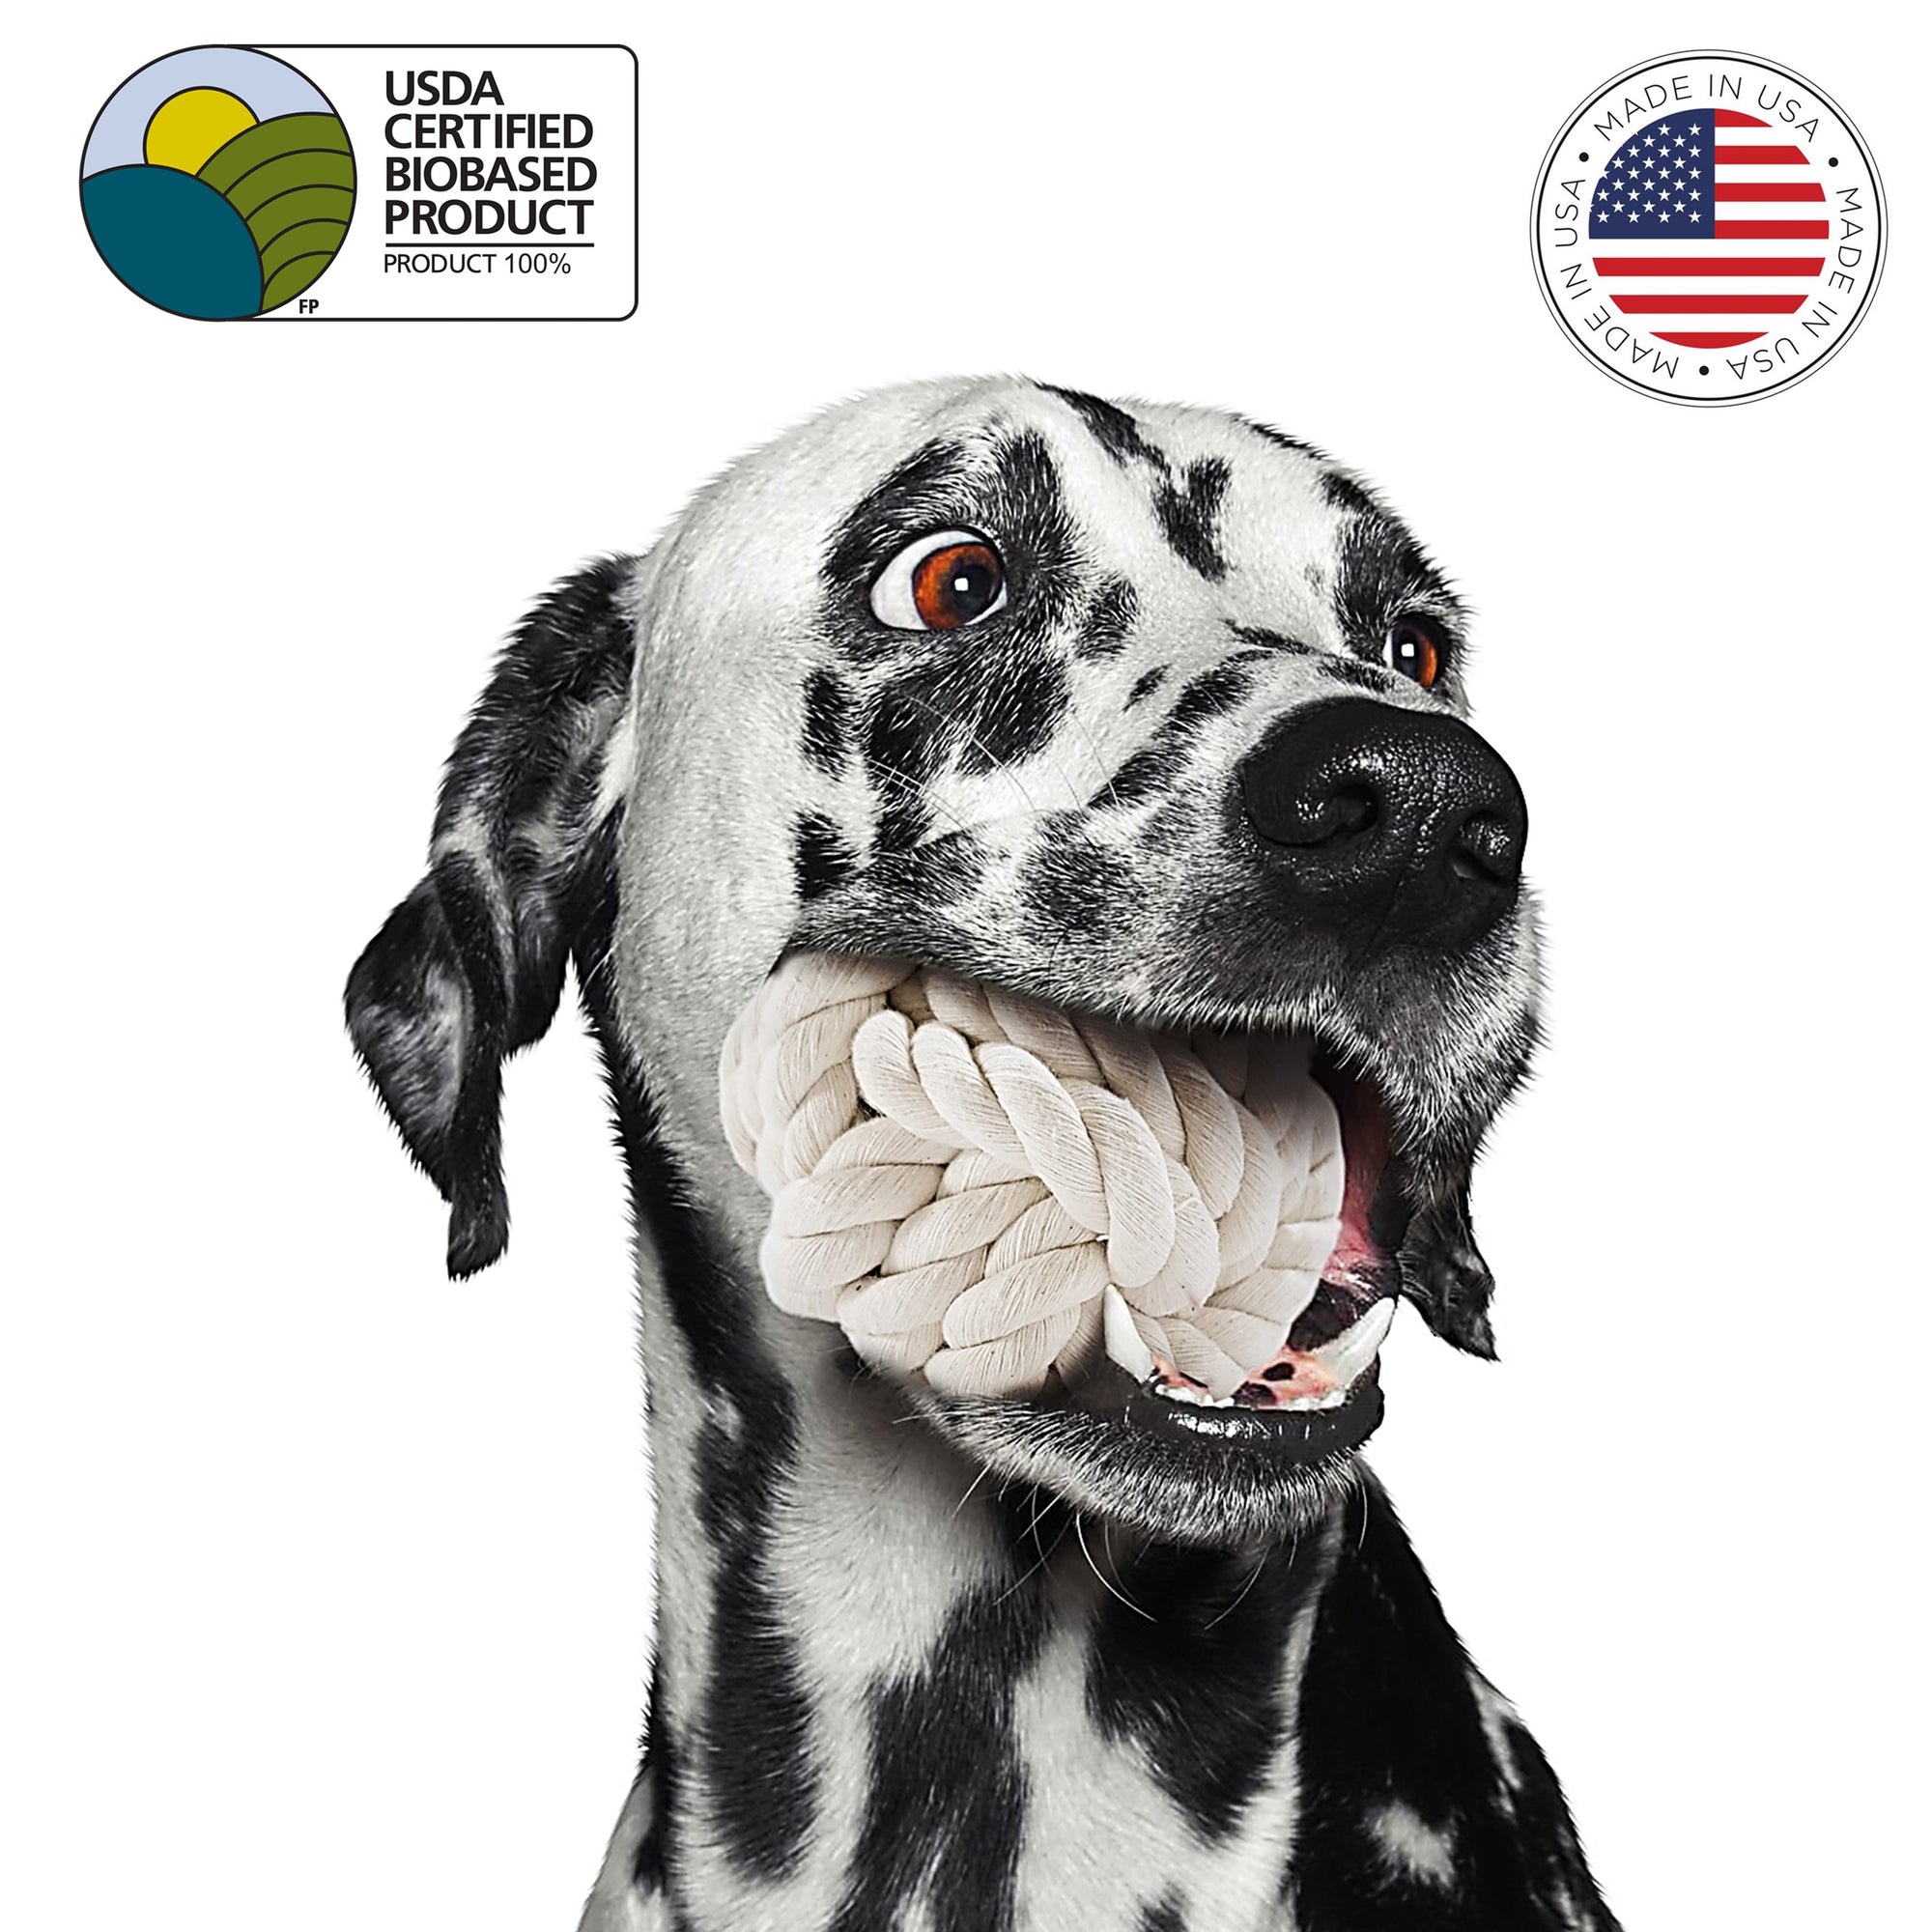 Dog with dog ball toy in mouth by earthcare